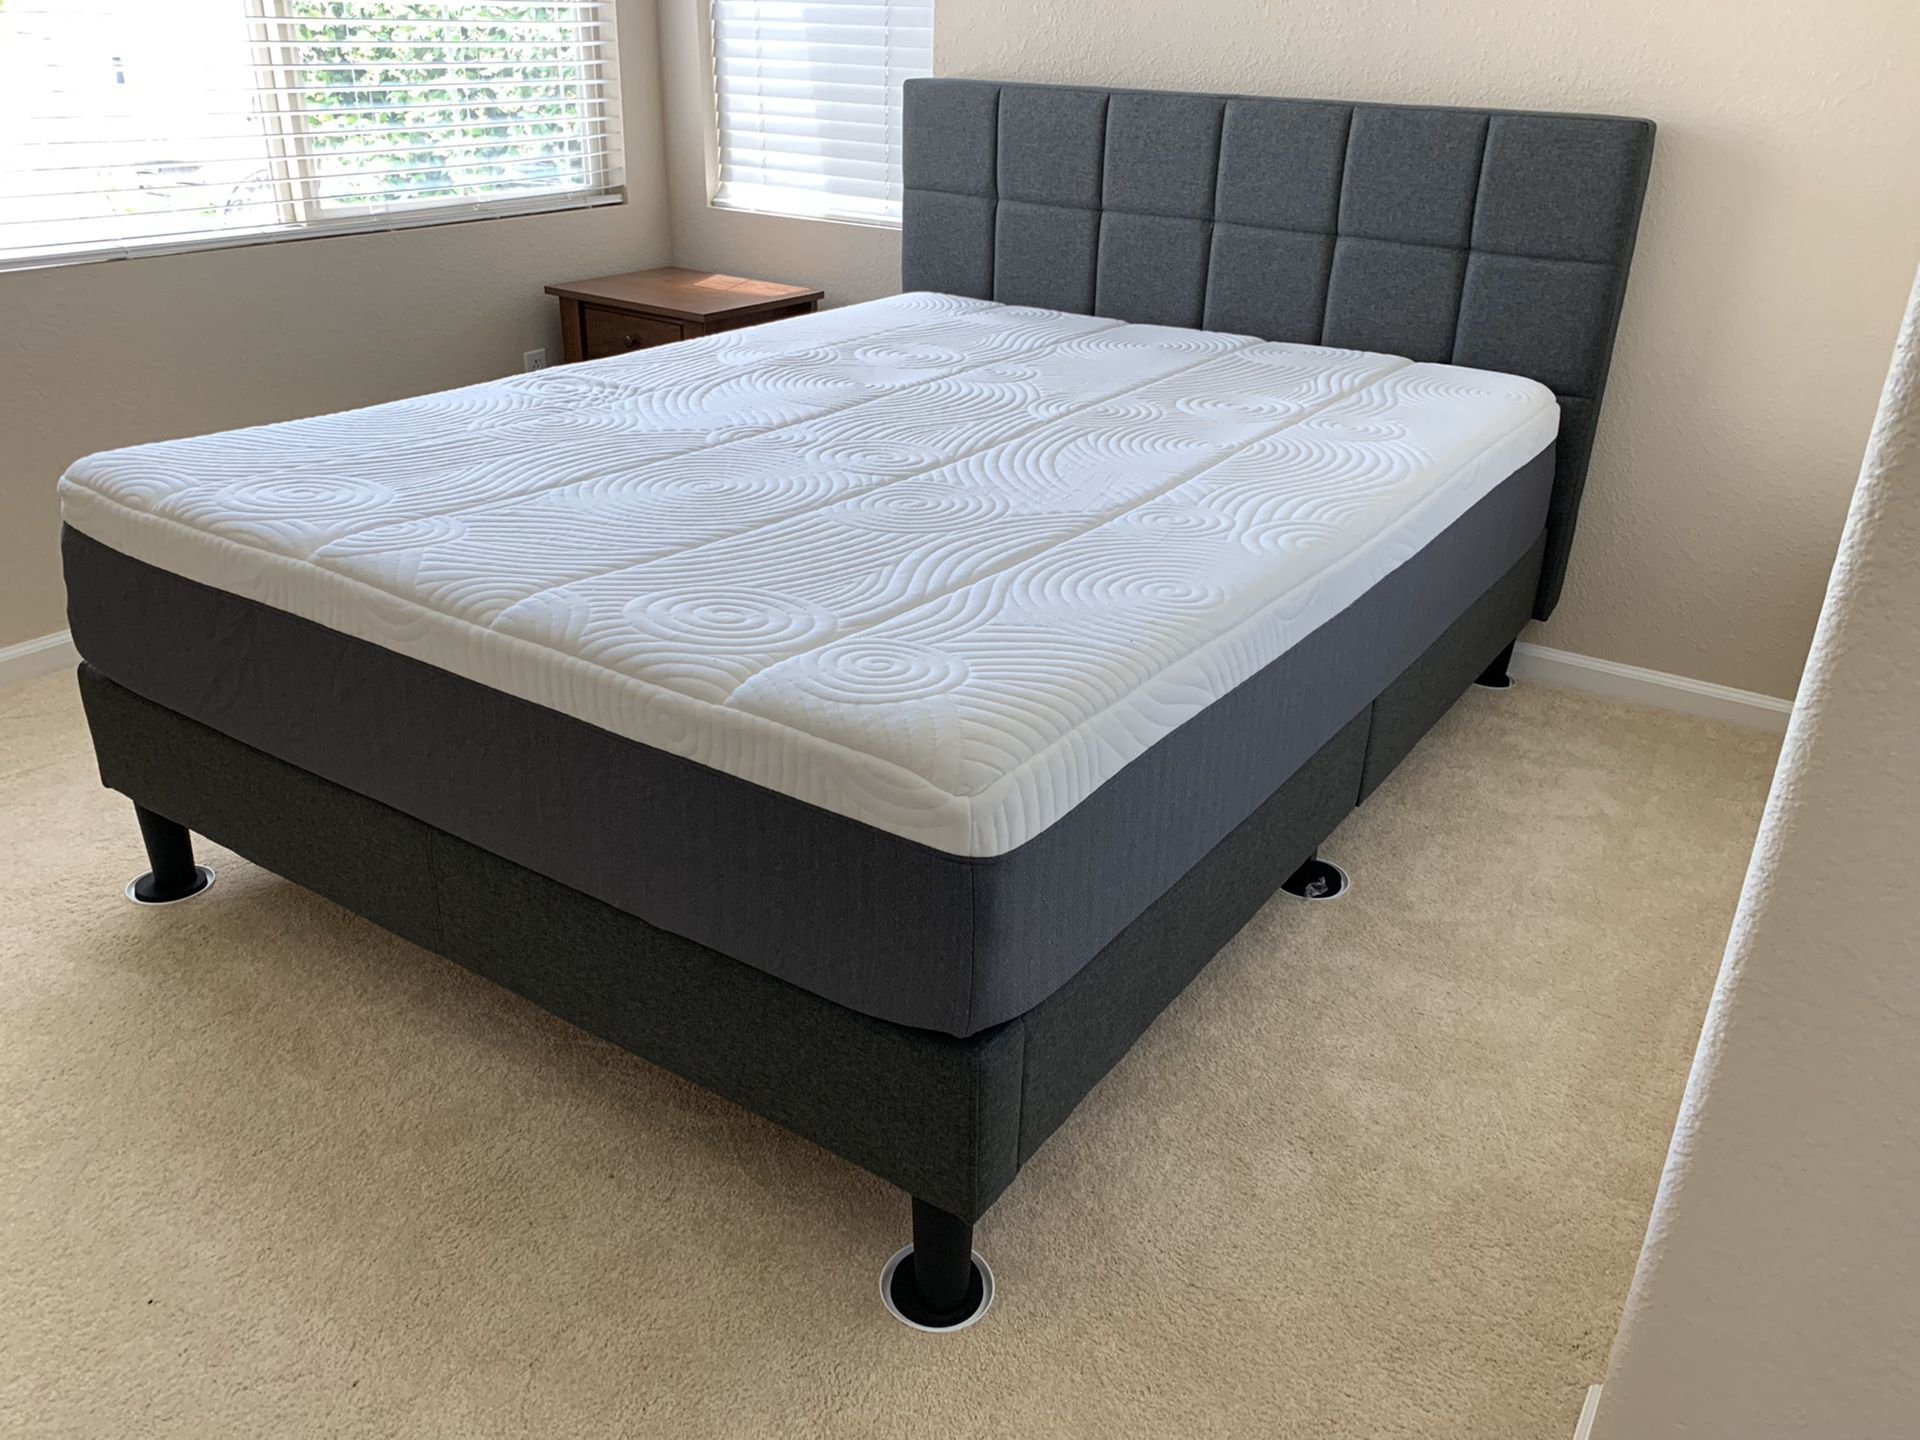 Queen Size Bed ! Brand New Queen Size Mattress and platform frame ! Blackstone frame and memory foam mattress ! Free delivery